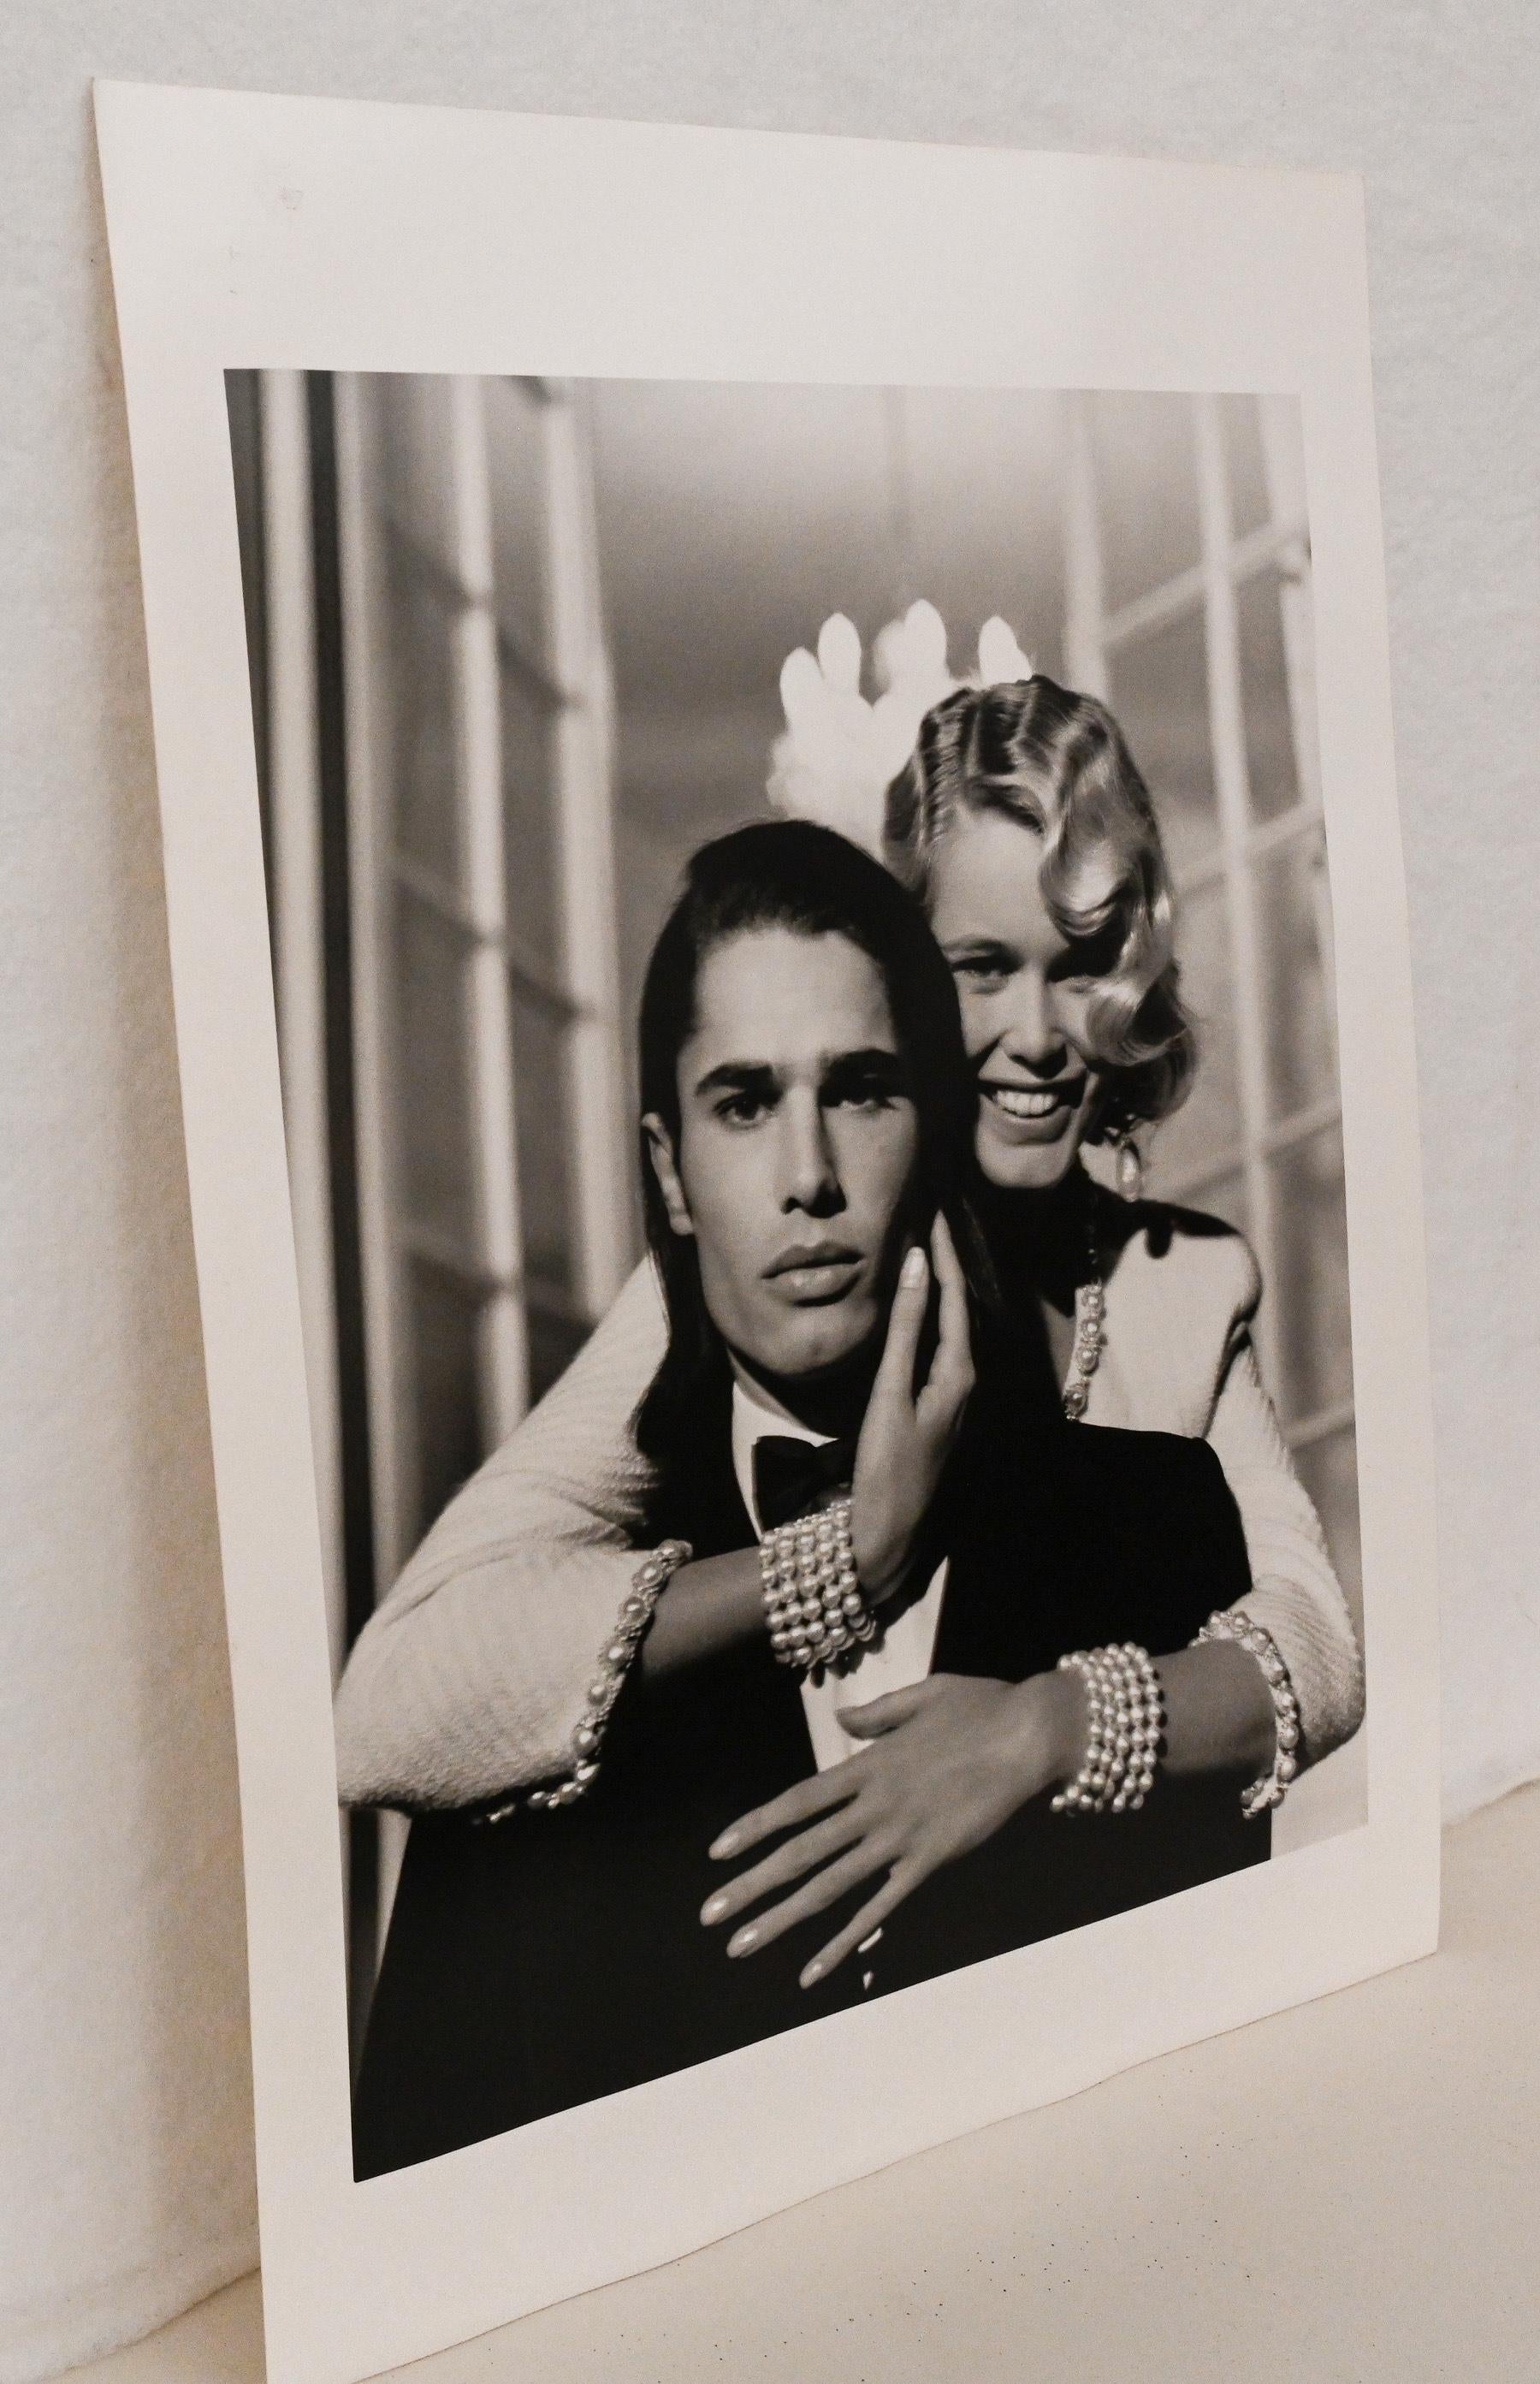 French Original photograph of Claudia Schiffer with Cameron Alborzian by Karl Lagerfeld